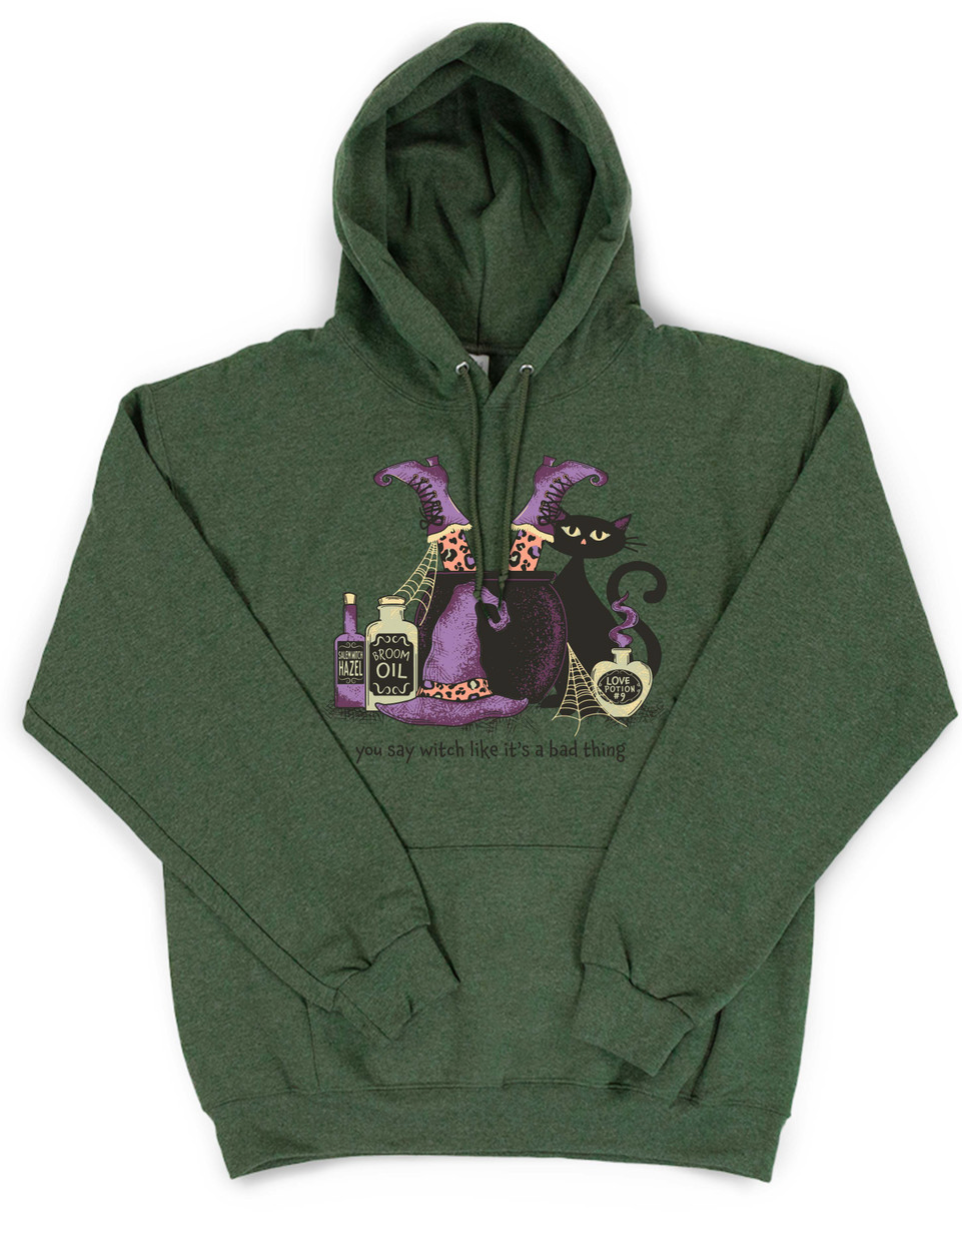 You say witch like it's a bad thing hoodie